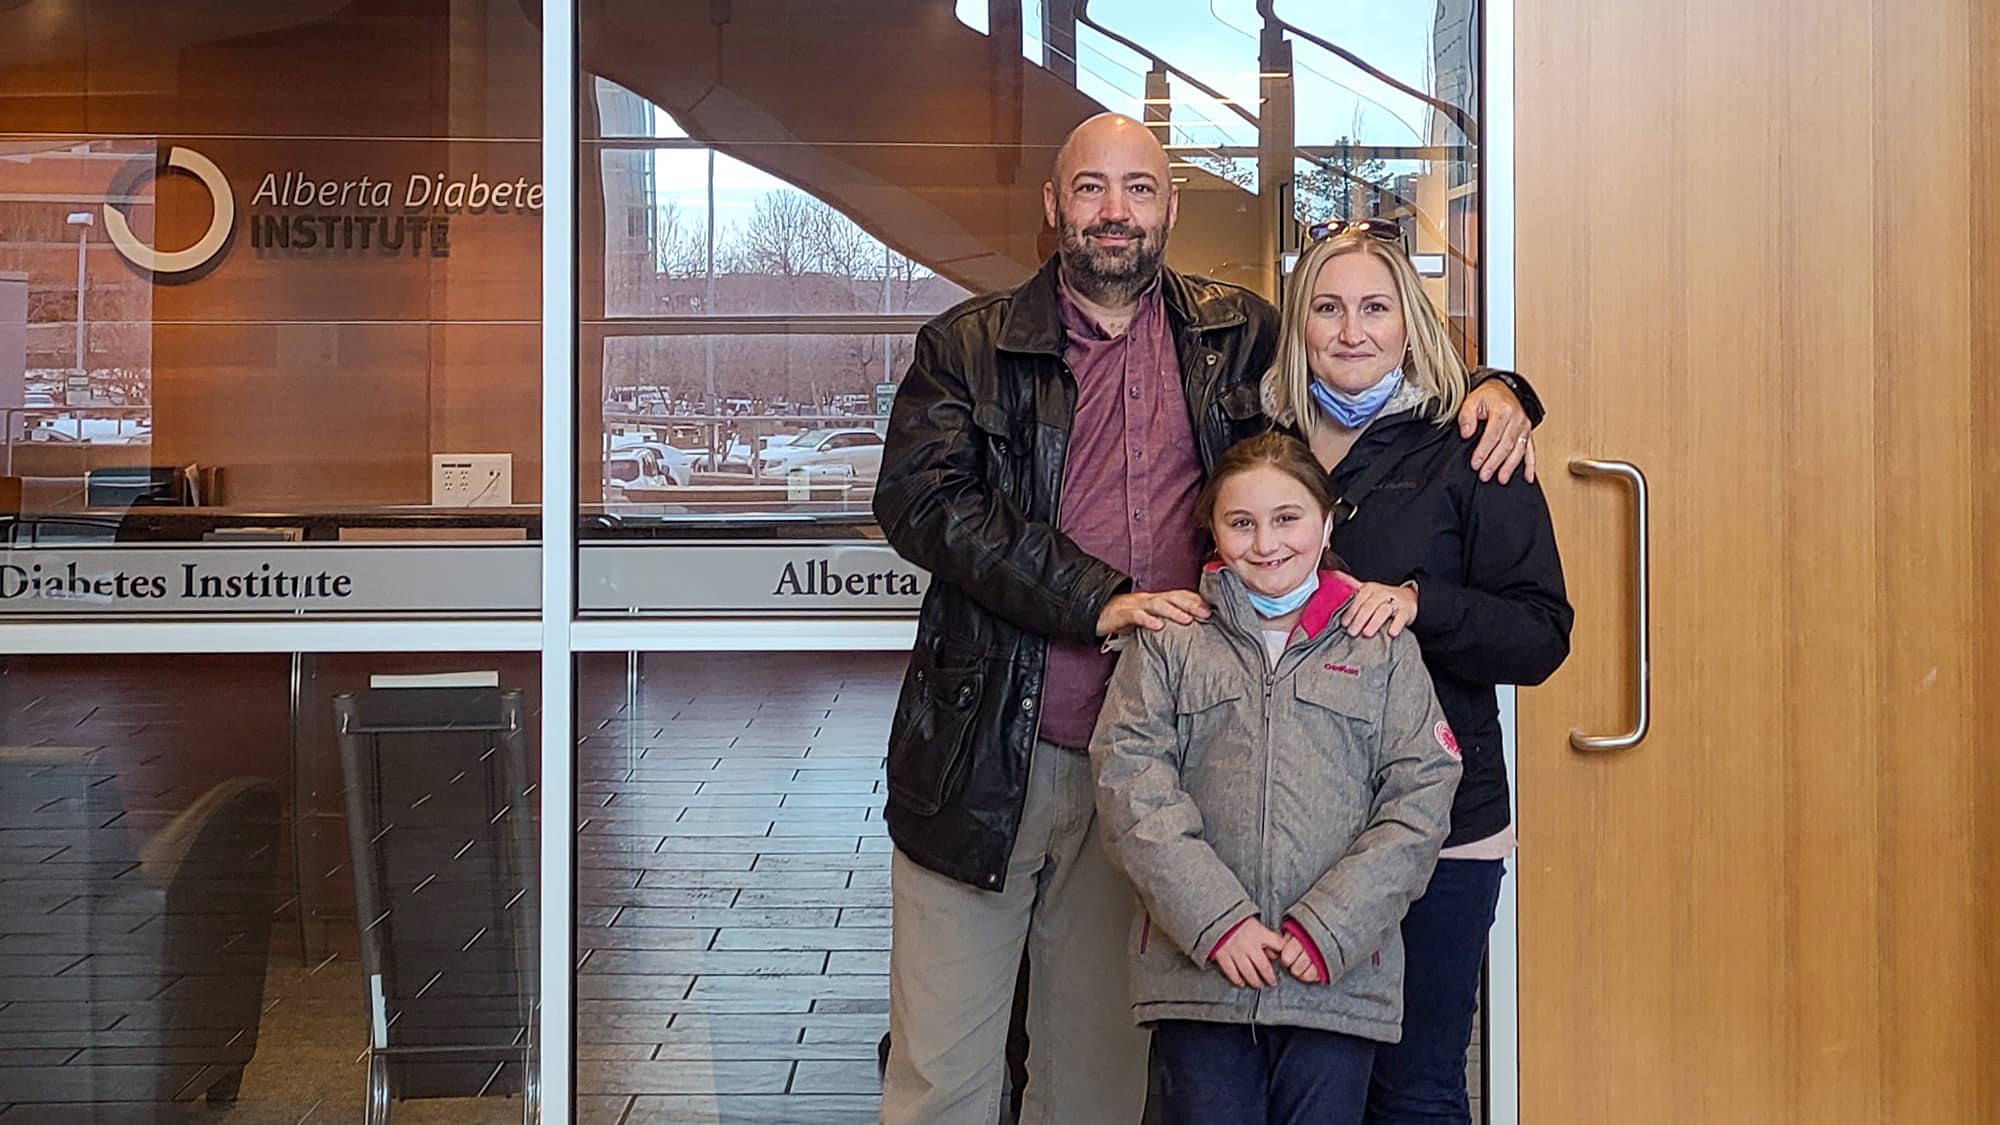 The Quinlan family standing in front of the Alberta Diabetes Institute